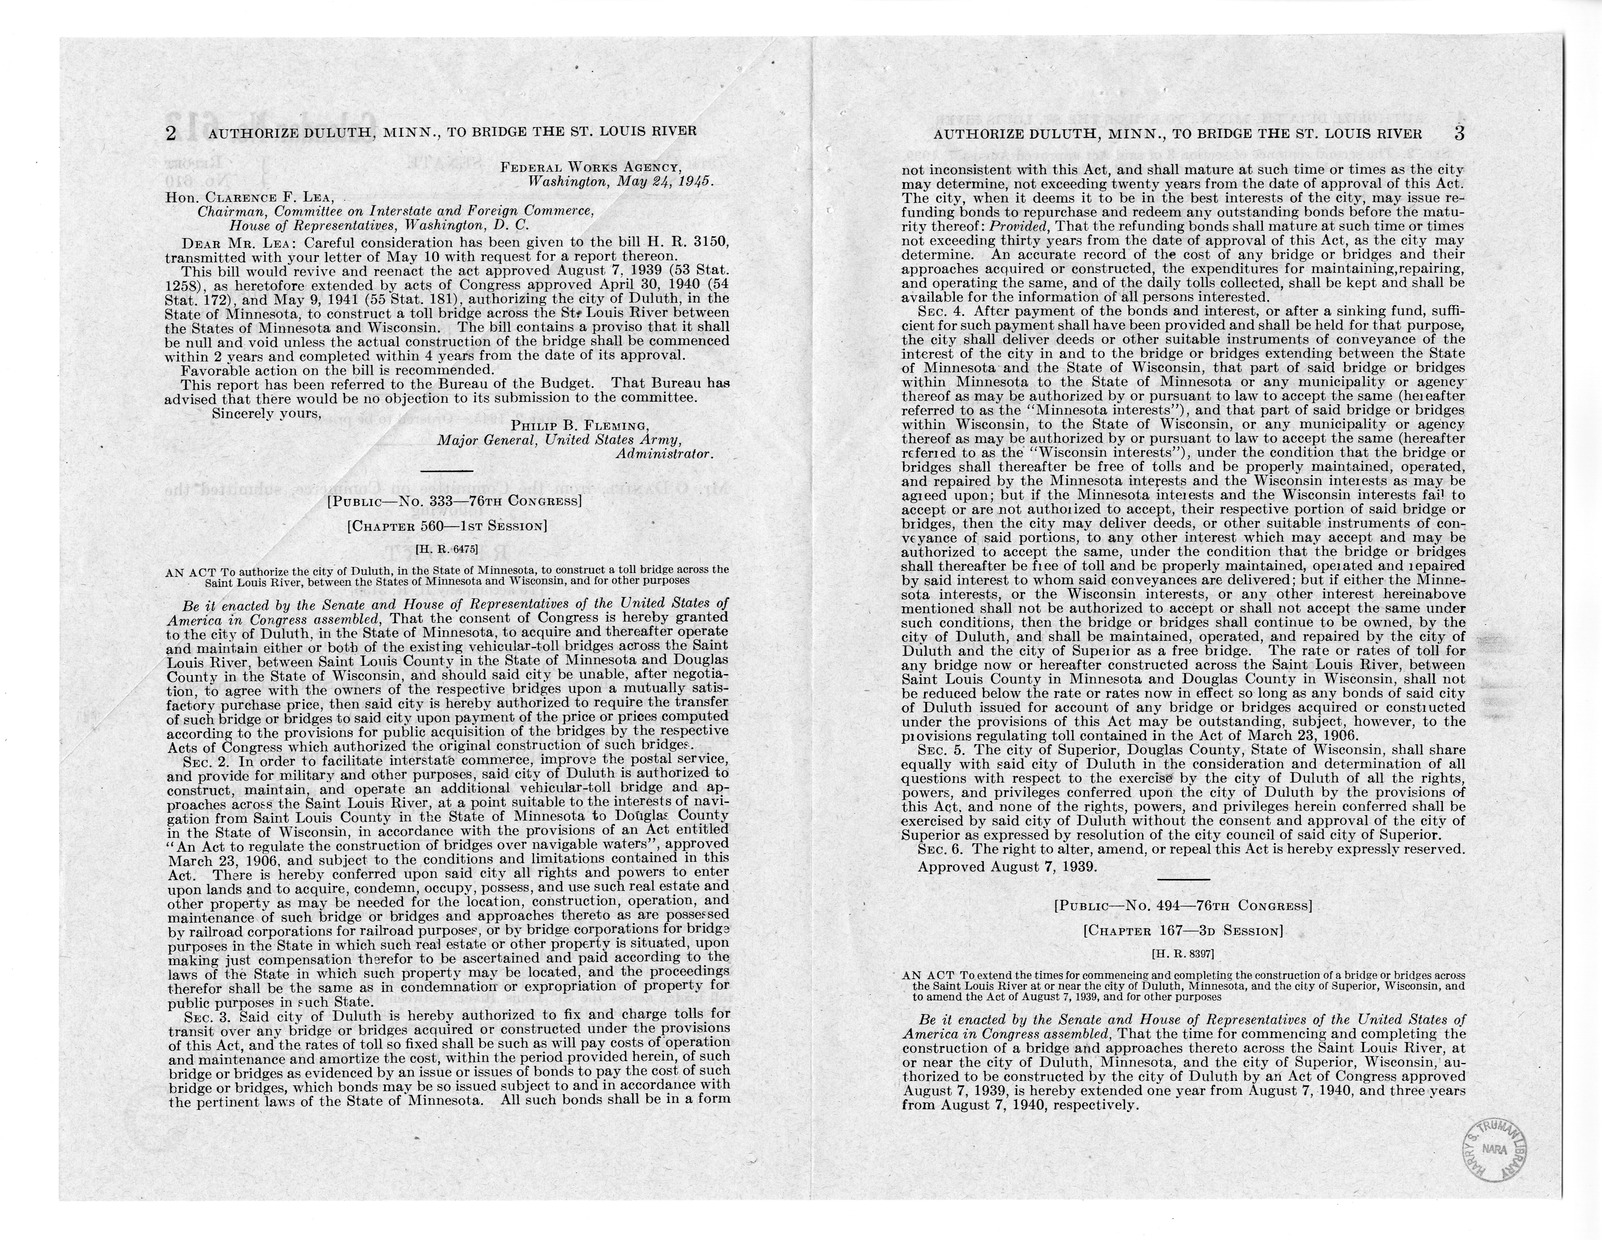 Memorandum from Frederick J. Bailey to M. C. Latta, H.R. 3150, To Revive and Reenact An Act to Authorize the City of Duluth, in the State of Minnesota, to Construct a Toll Bridge Across the Saint Louis River, Between the States of Minnesota and Wisconsin,